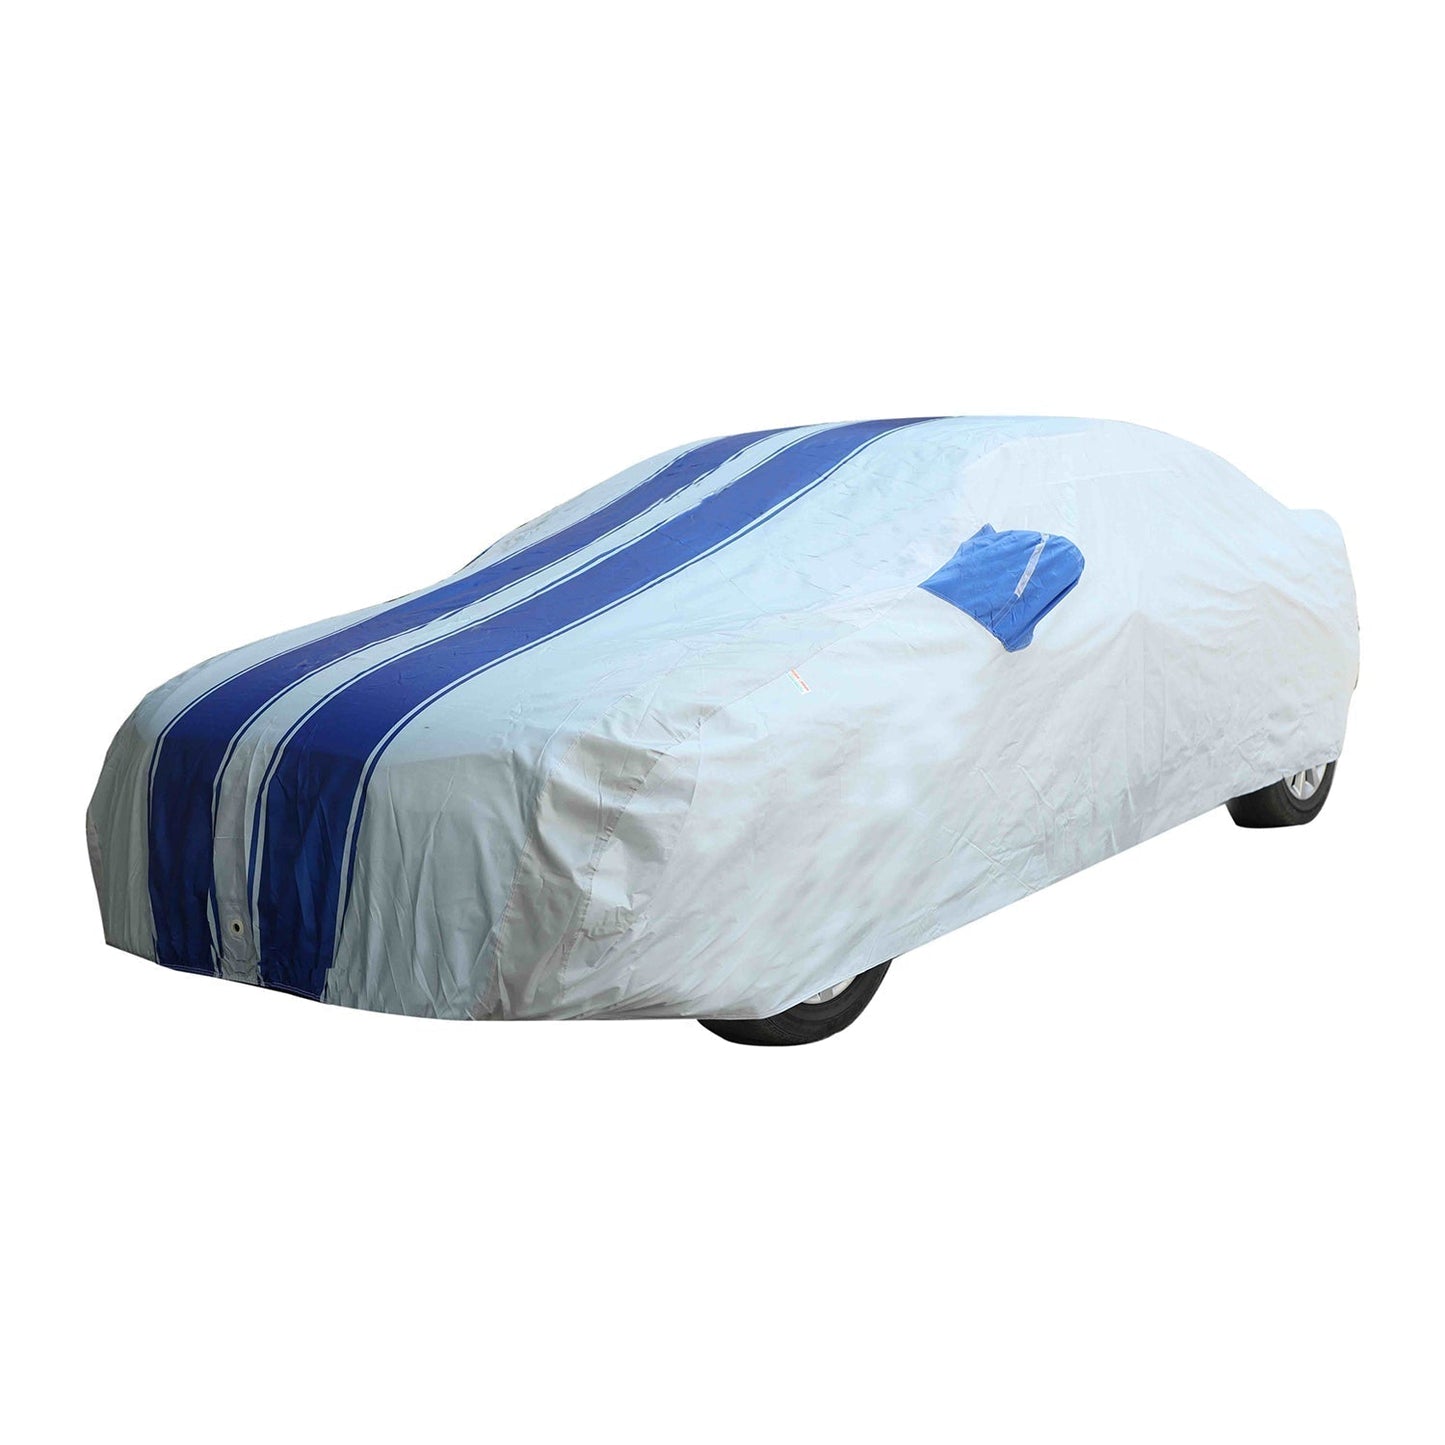 Oshotto 100% Blue dustproof and Water Resistant Car Body Cover with Mirror Pockets For Rolls Royce Cullinan